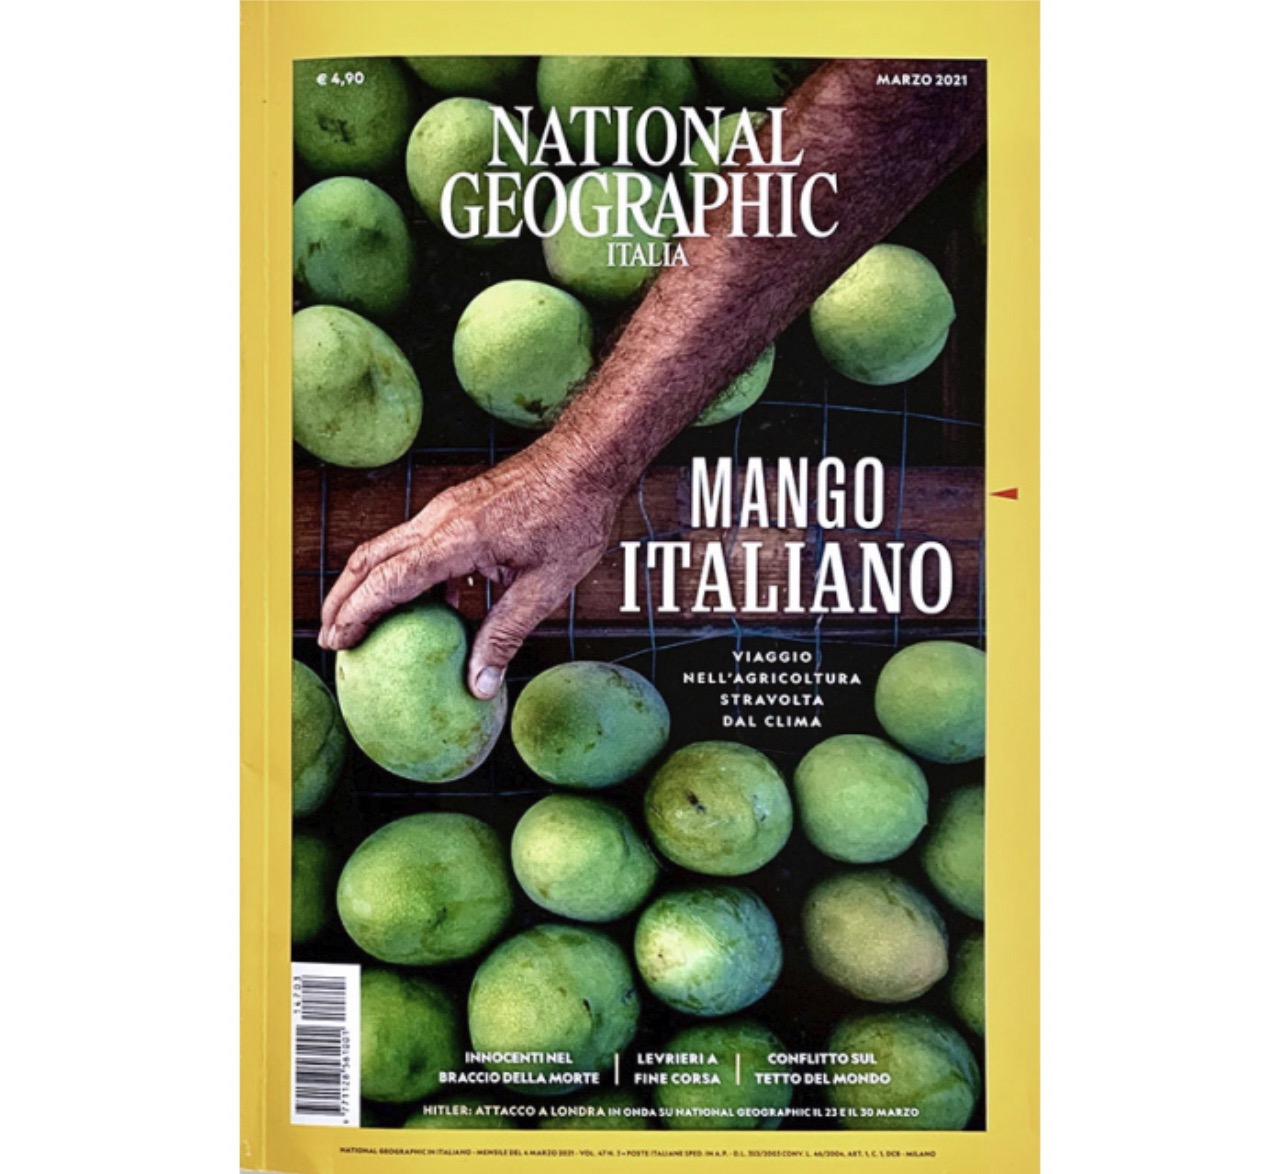 “Global Warming and agriculture” in National Geographic Italy